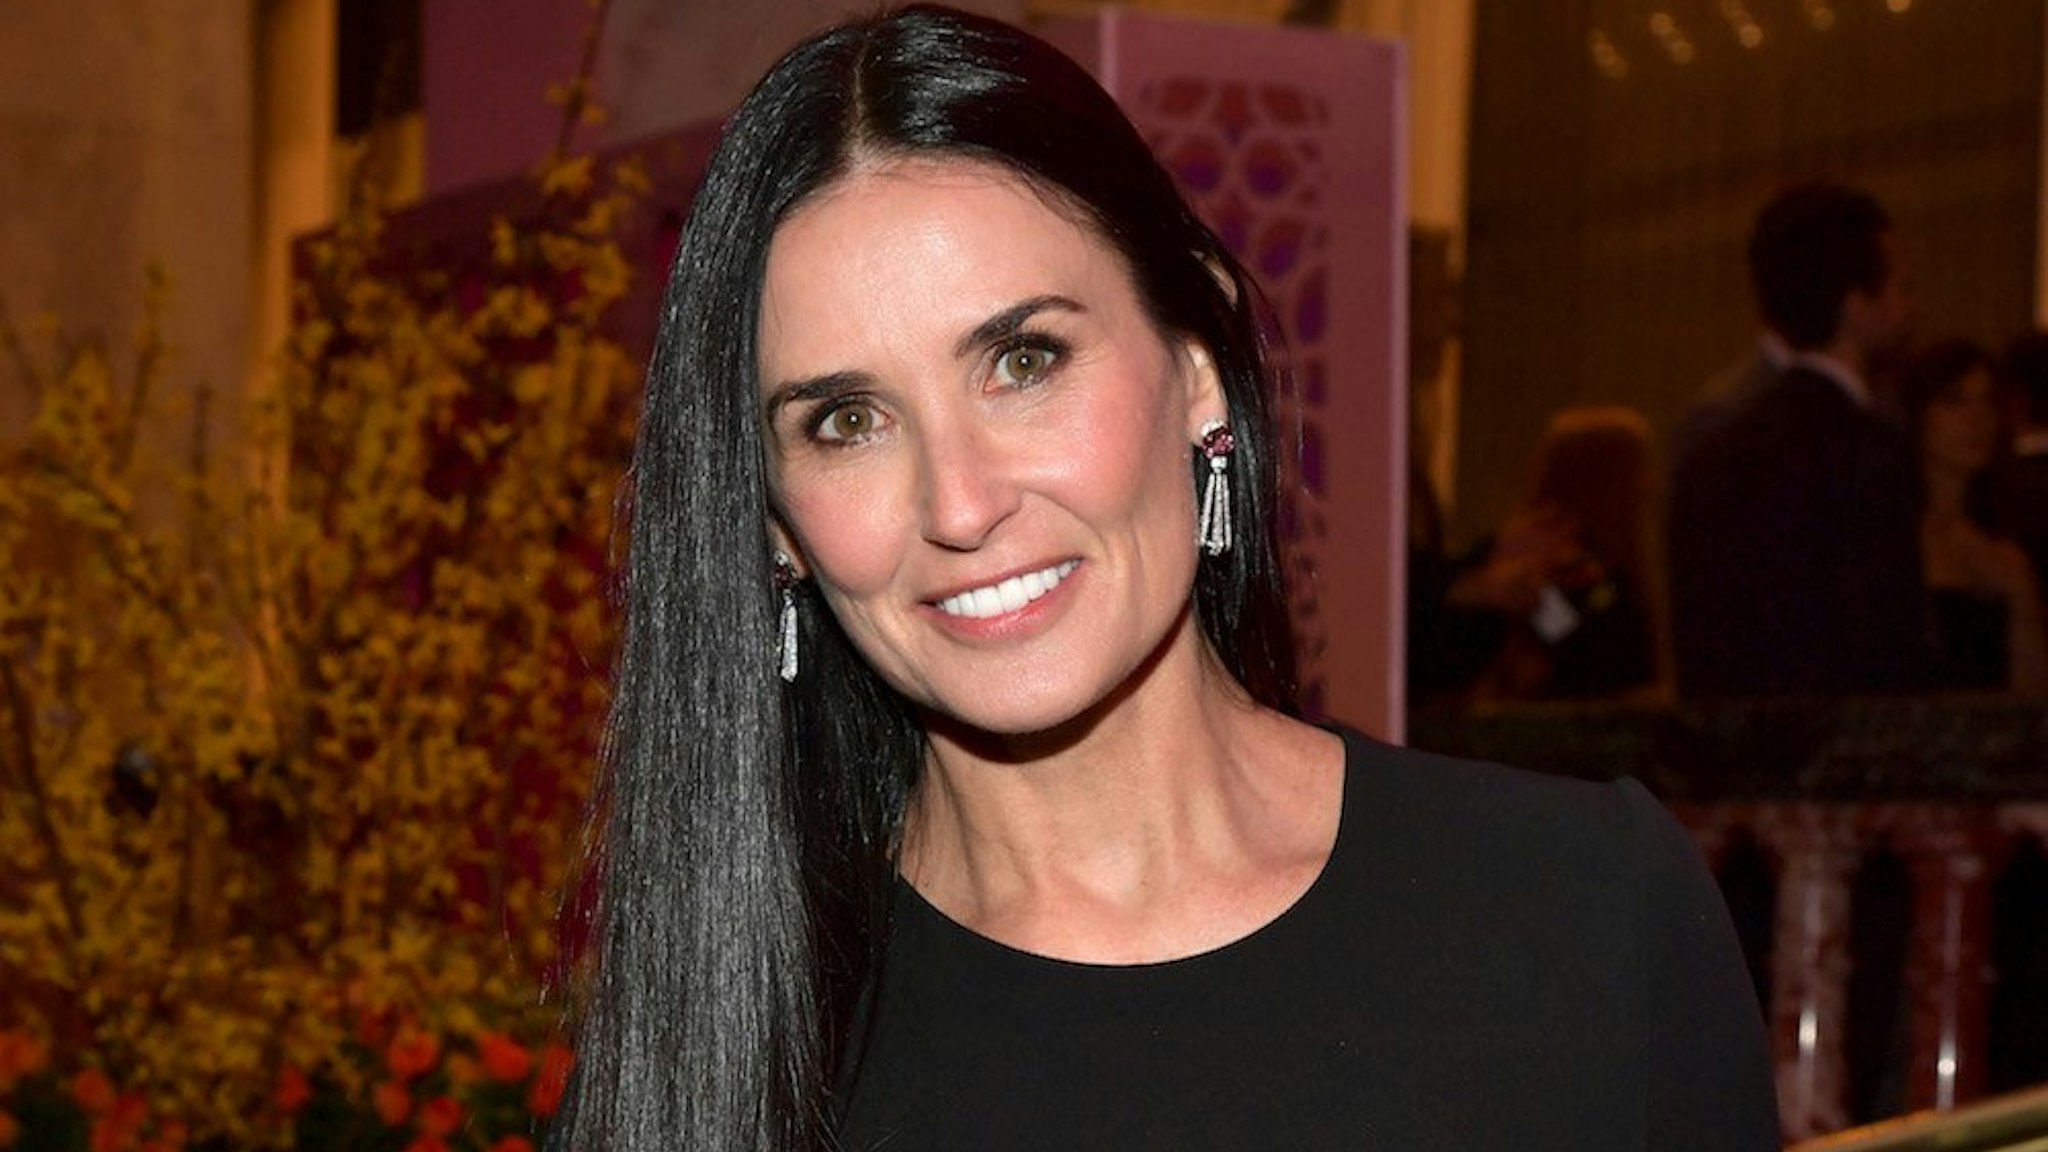 Demi Moore attends The Women's Cancer Research Fund's An Unforgettable Evening Benefit Gala at the Beverly Wilshire Four Seasons Hotel on February 28, 2019 in Beverly Hills, California.